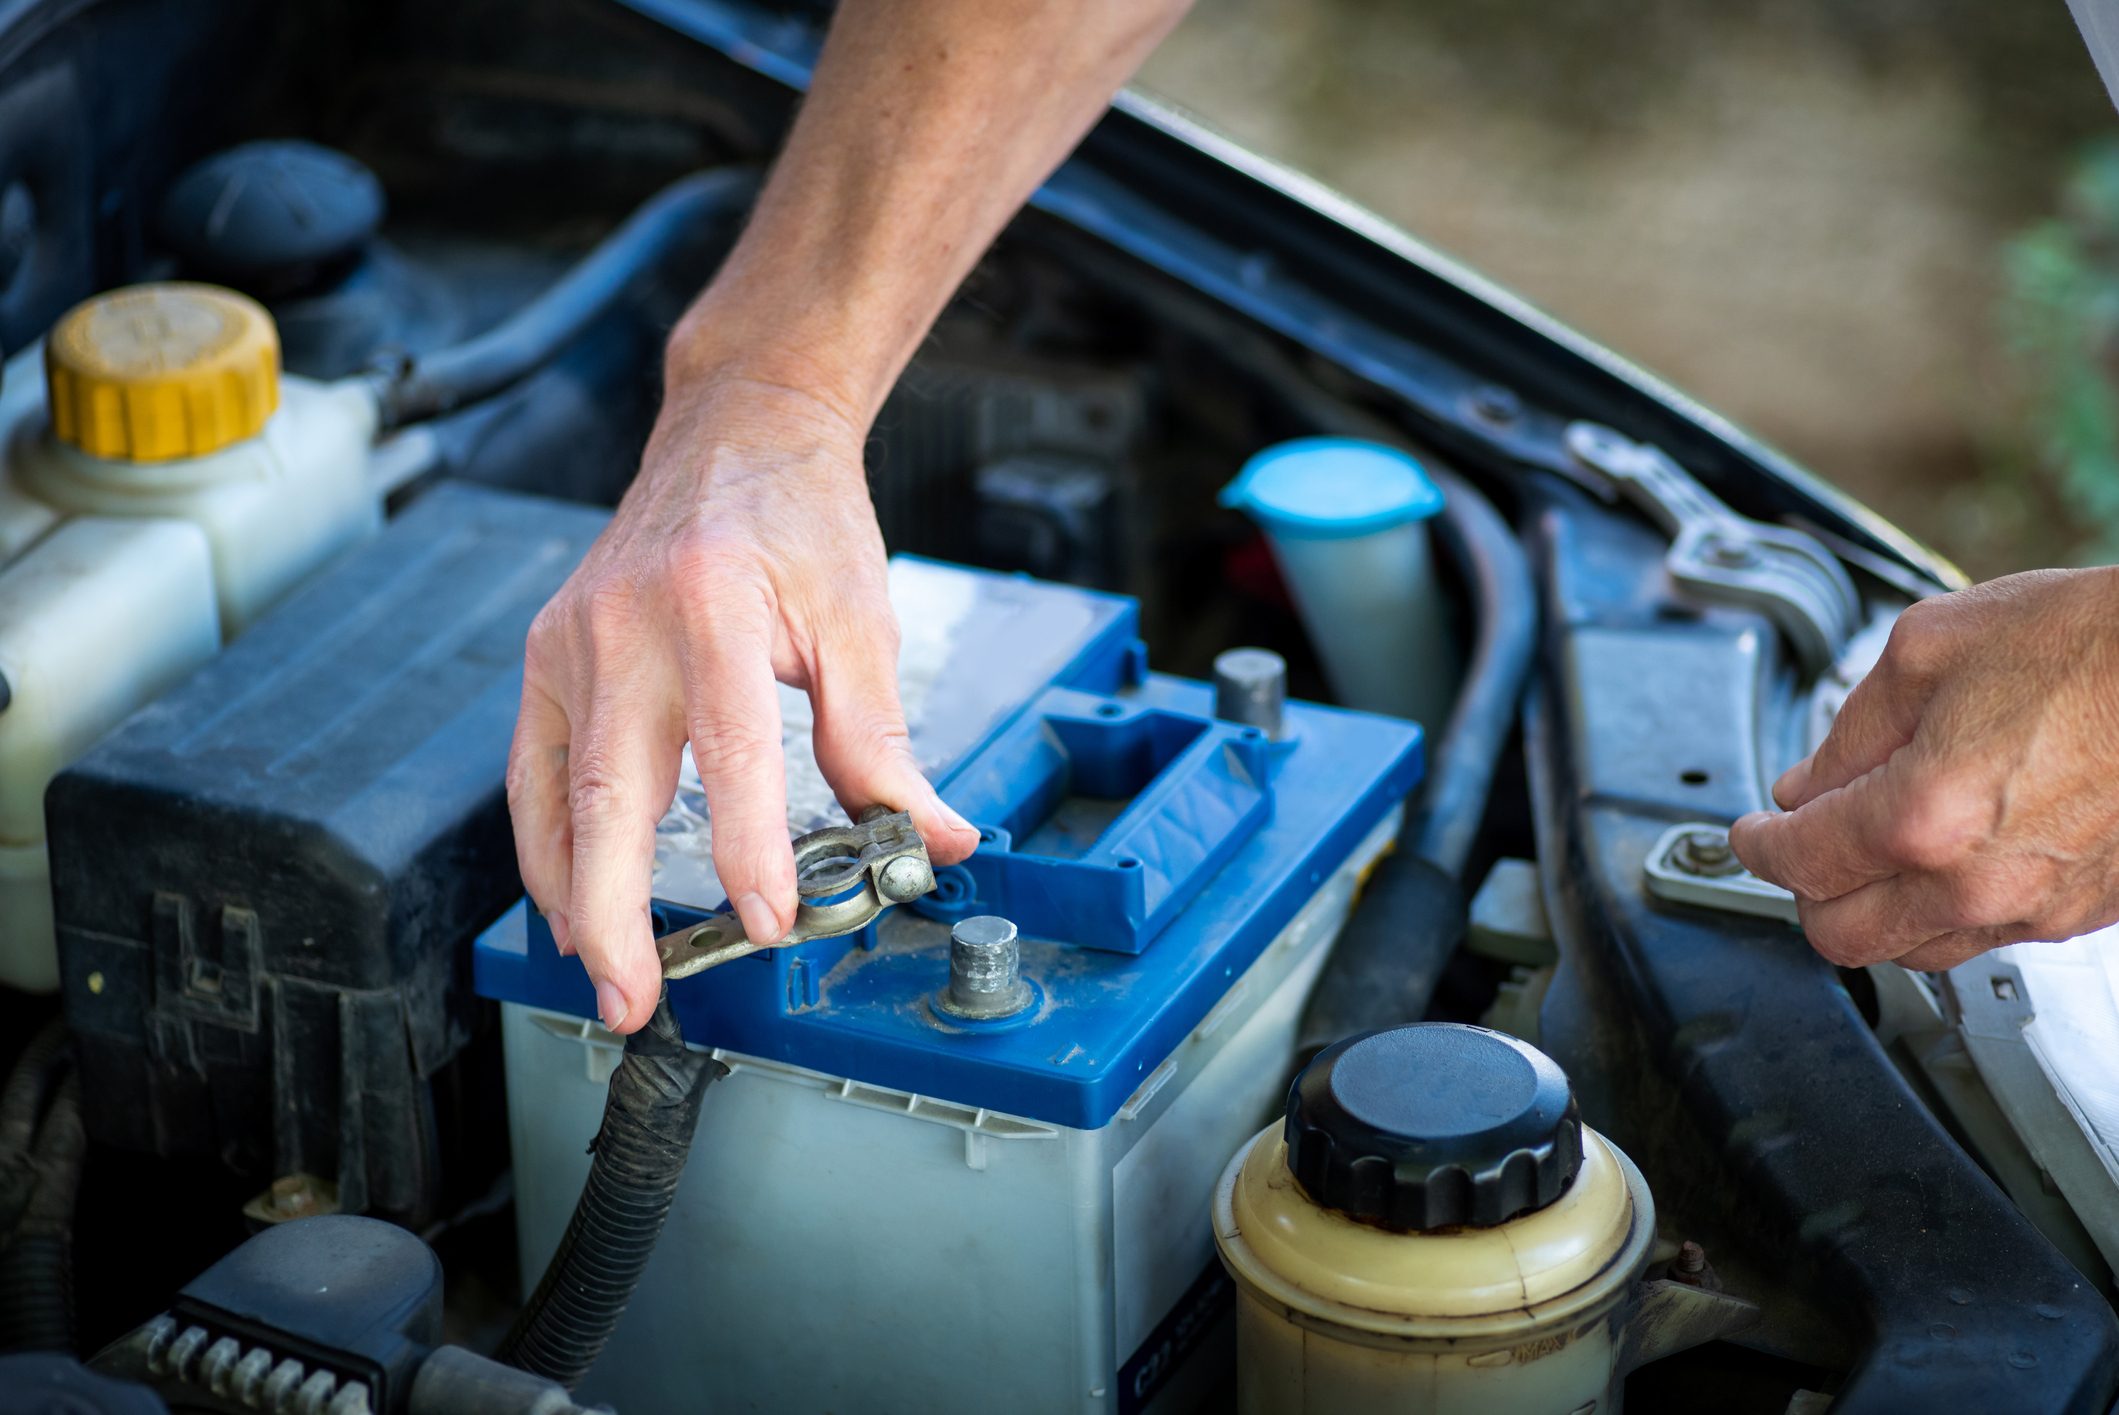 Man connecting the car battery to the vehicle